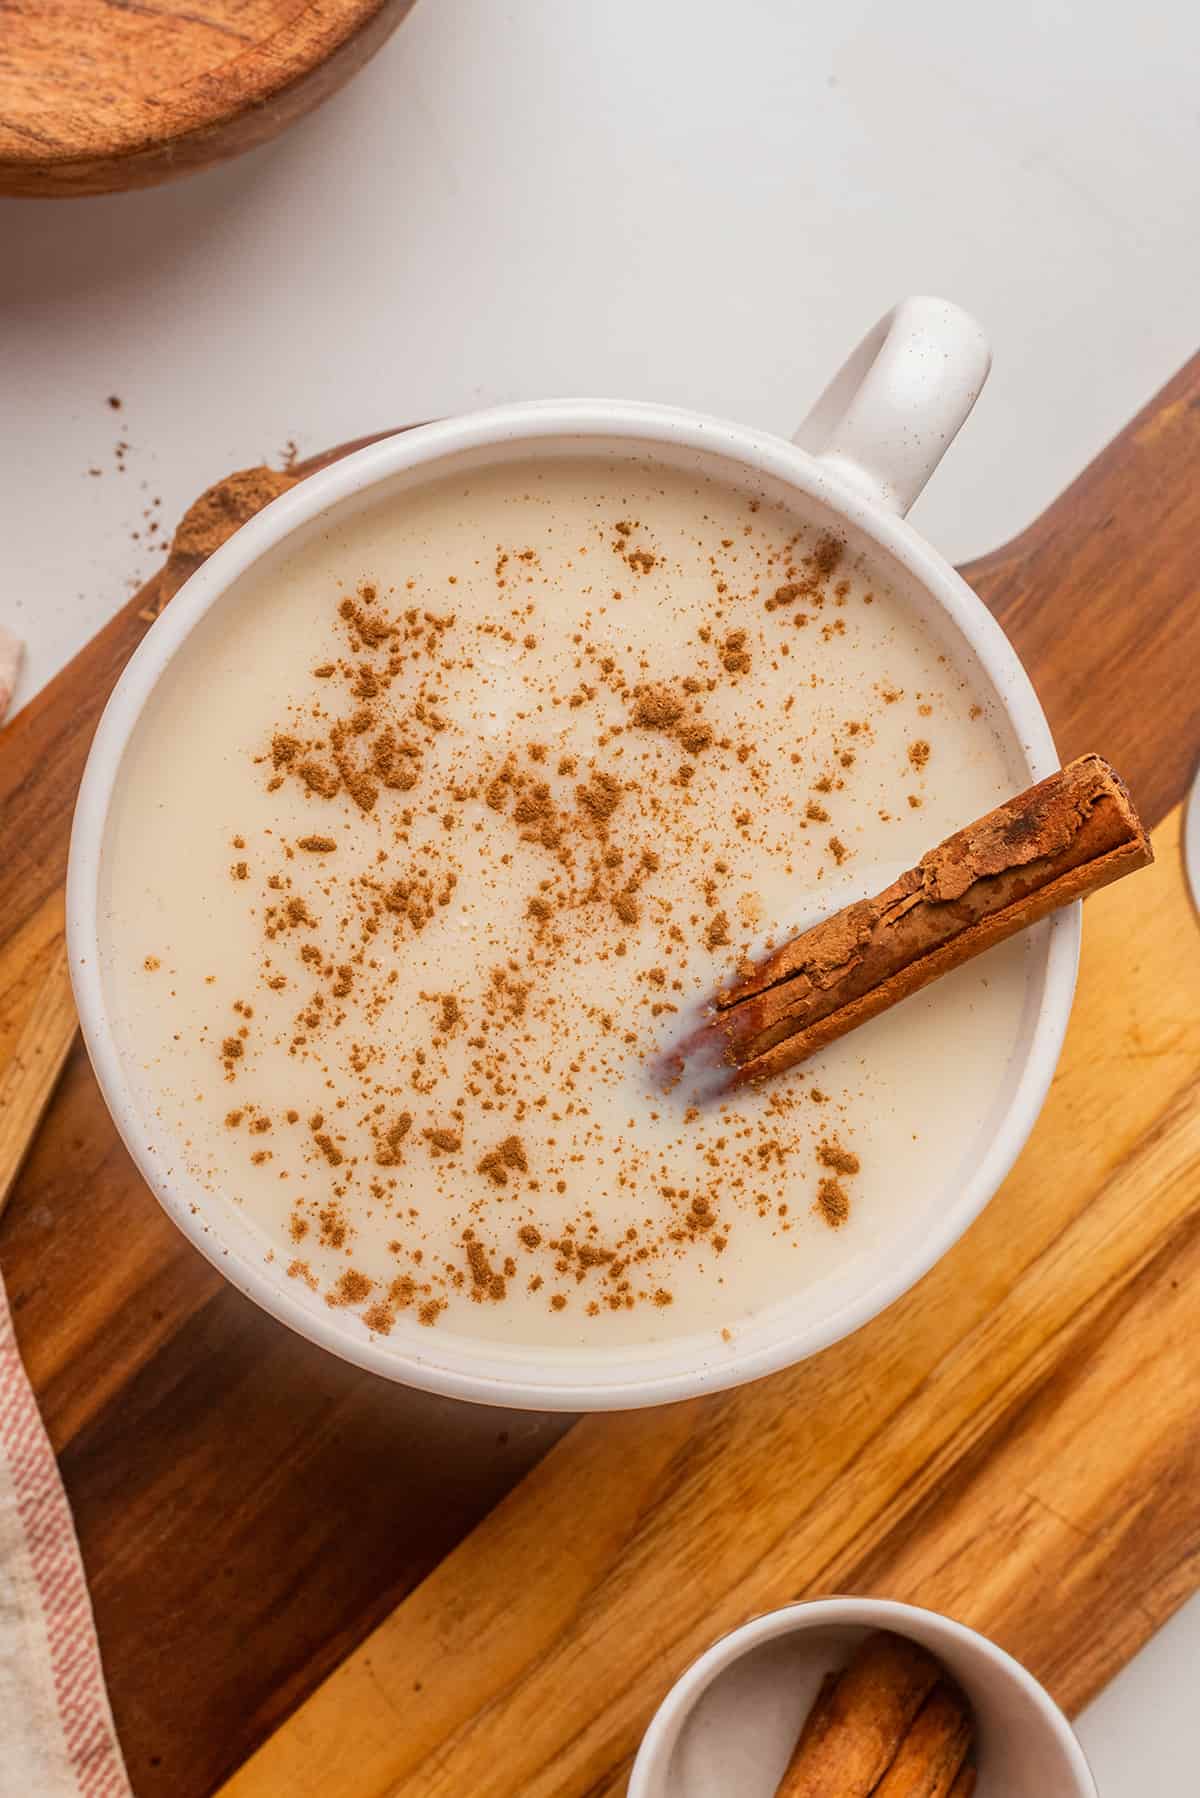 Atole de Vainilla served in a mug topped with ground cinnamon and a whole cinnamon stick.